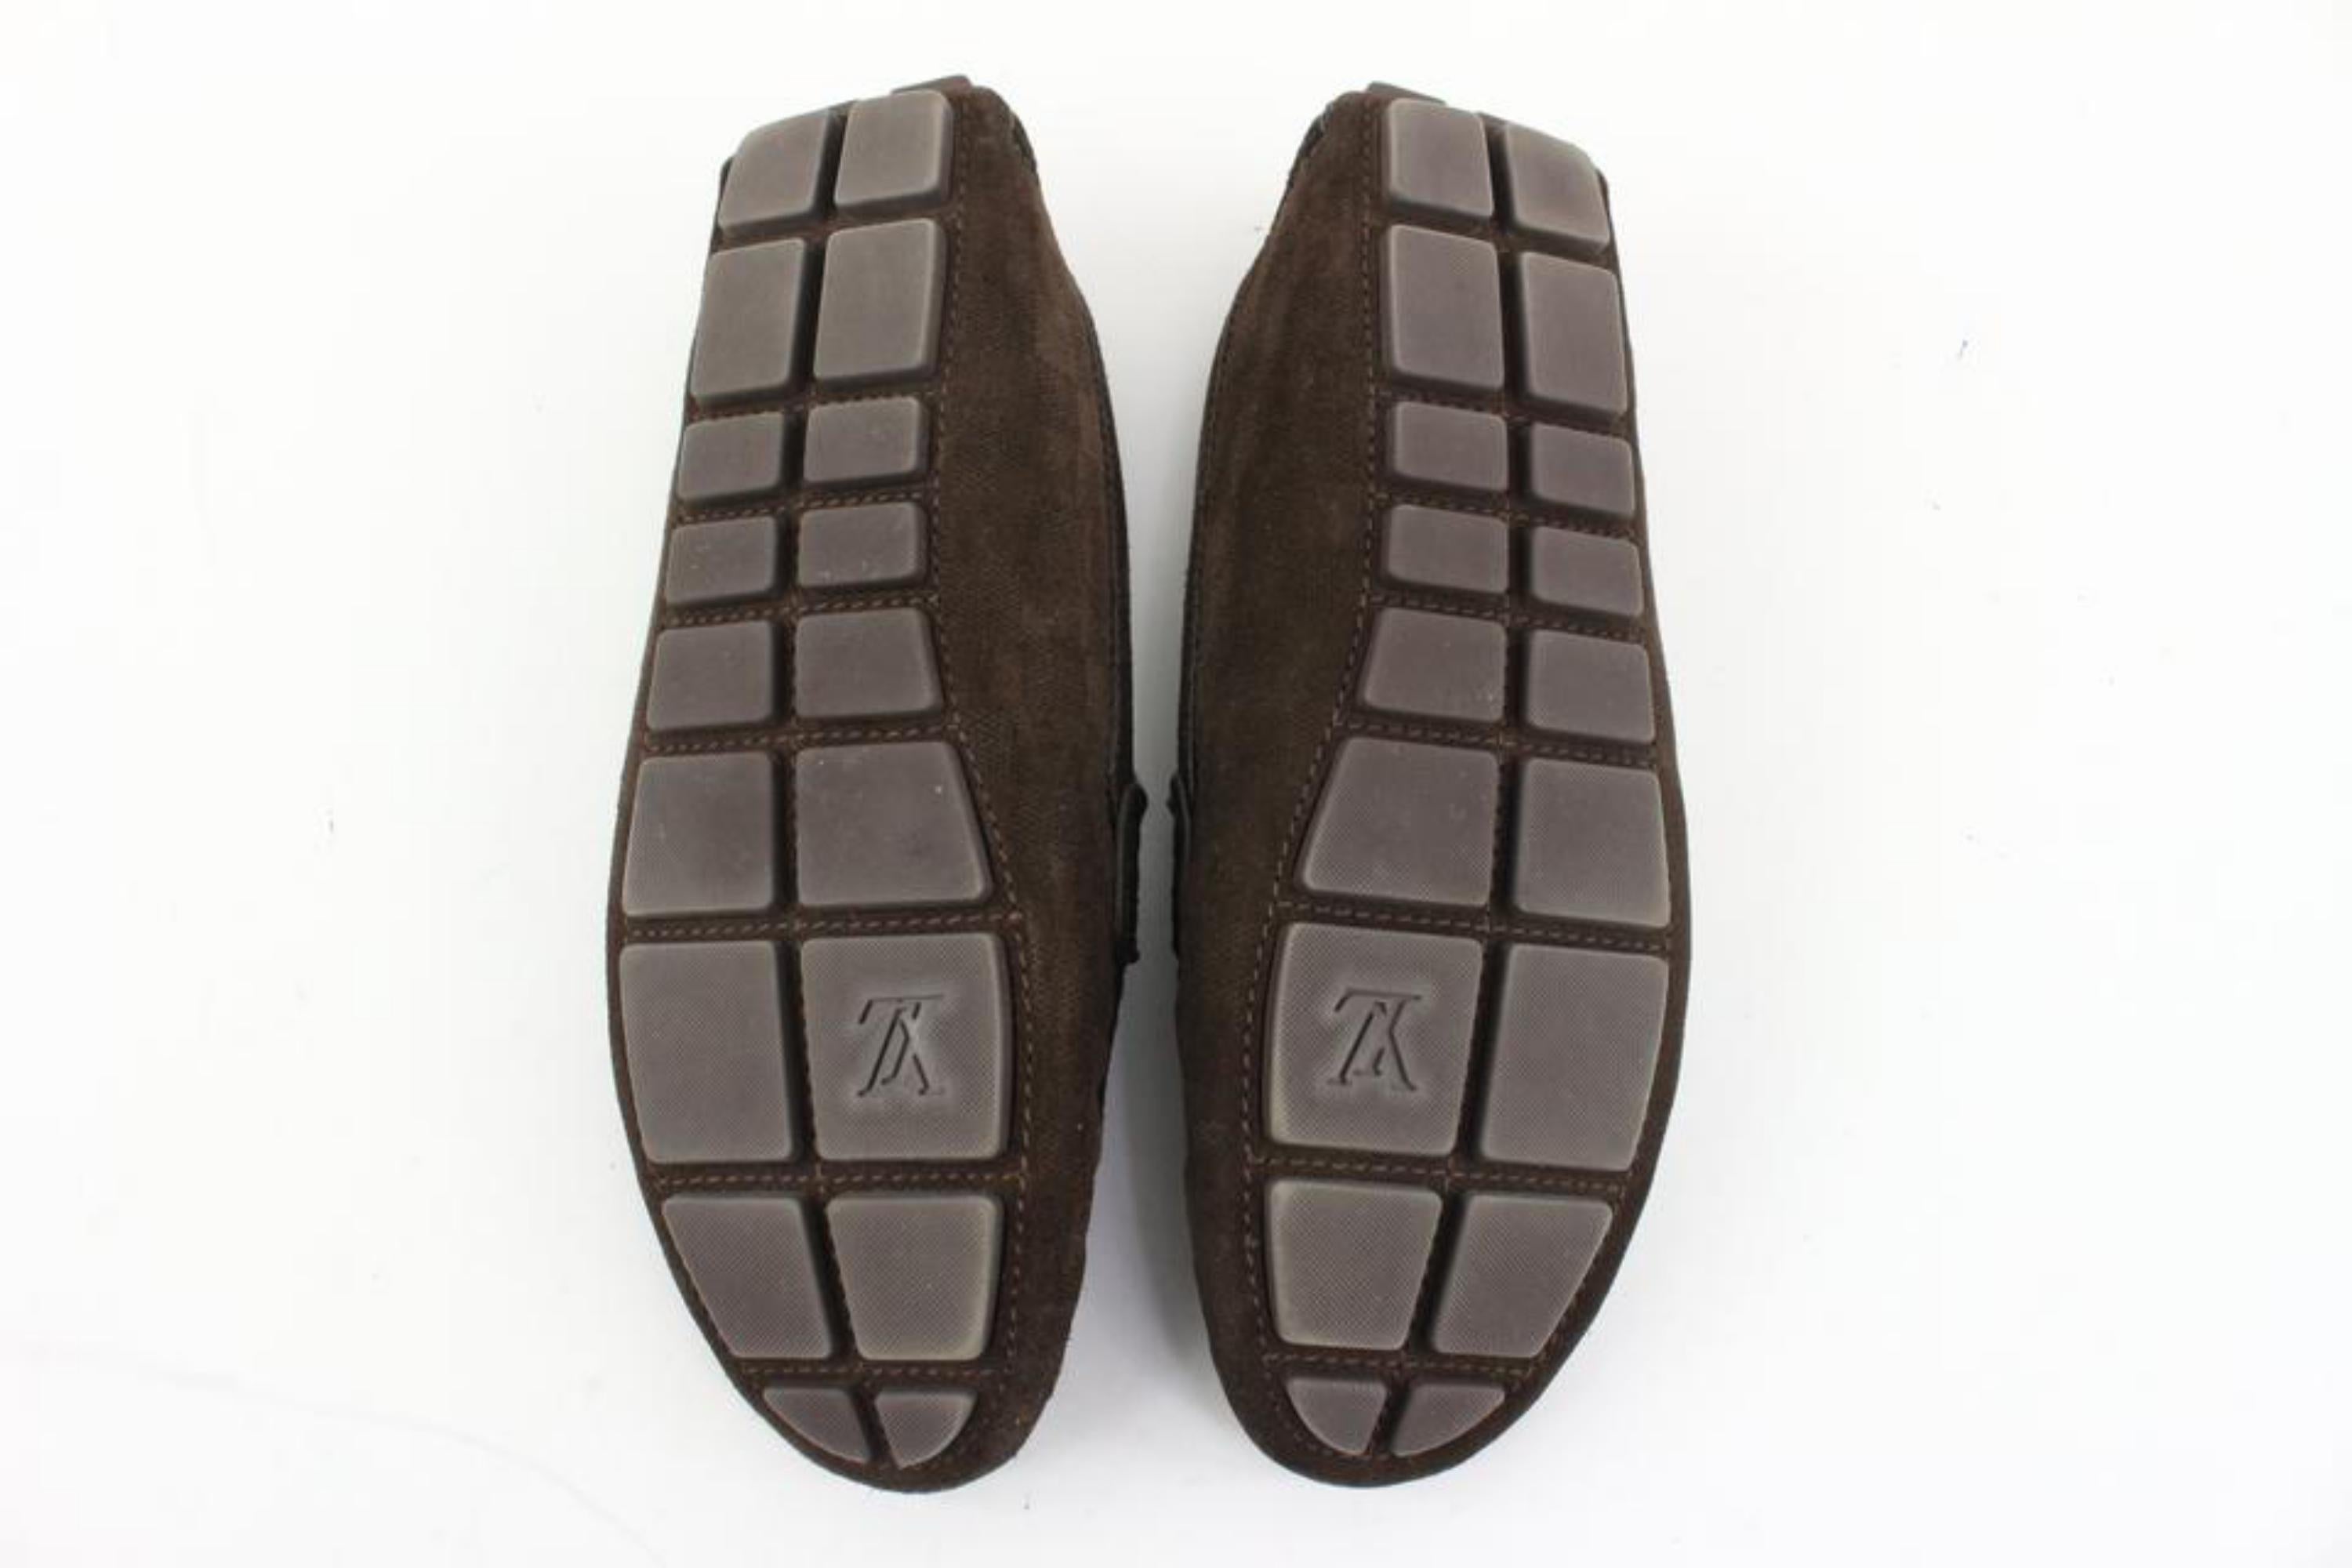 lv formal shoes